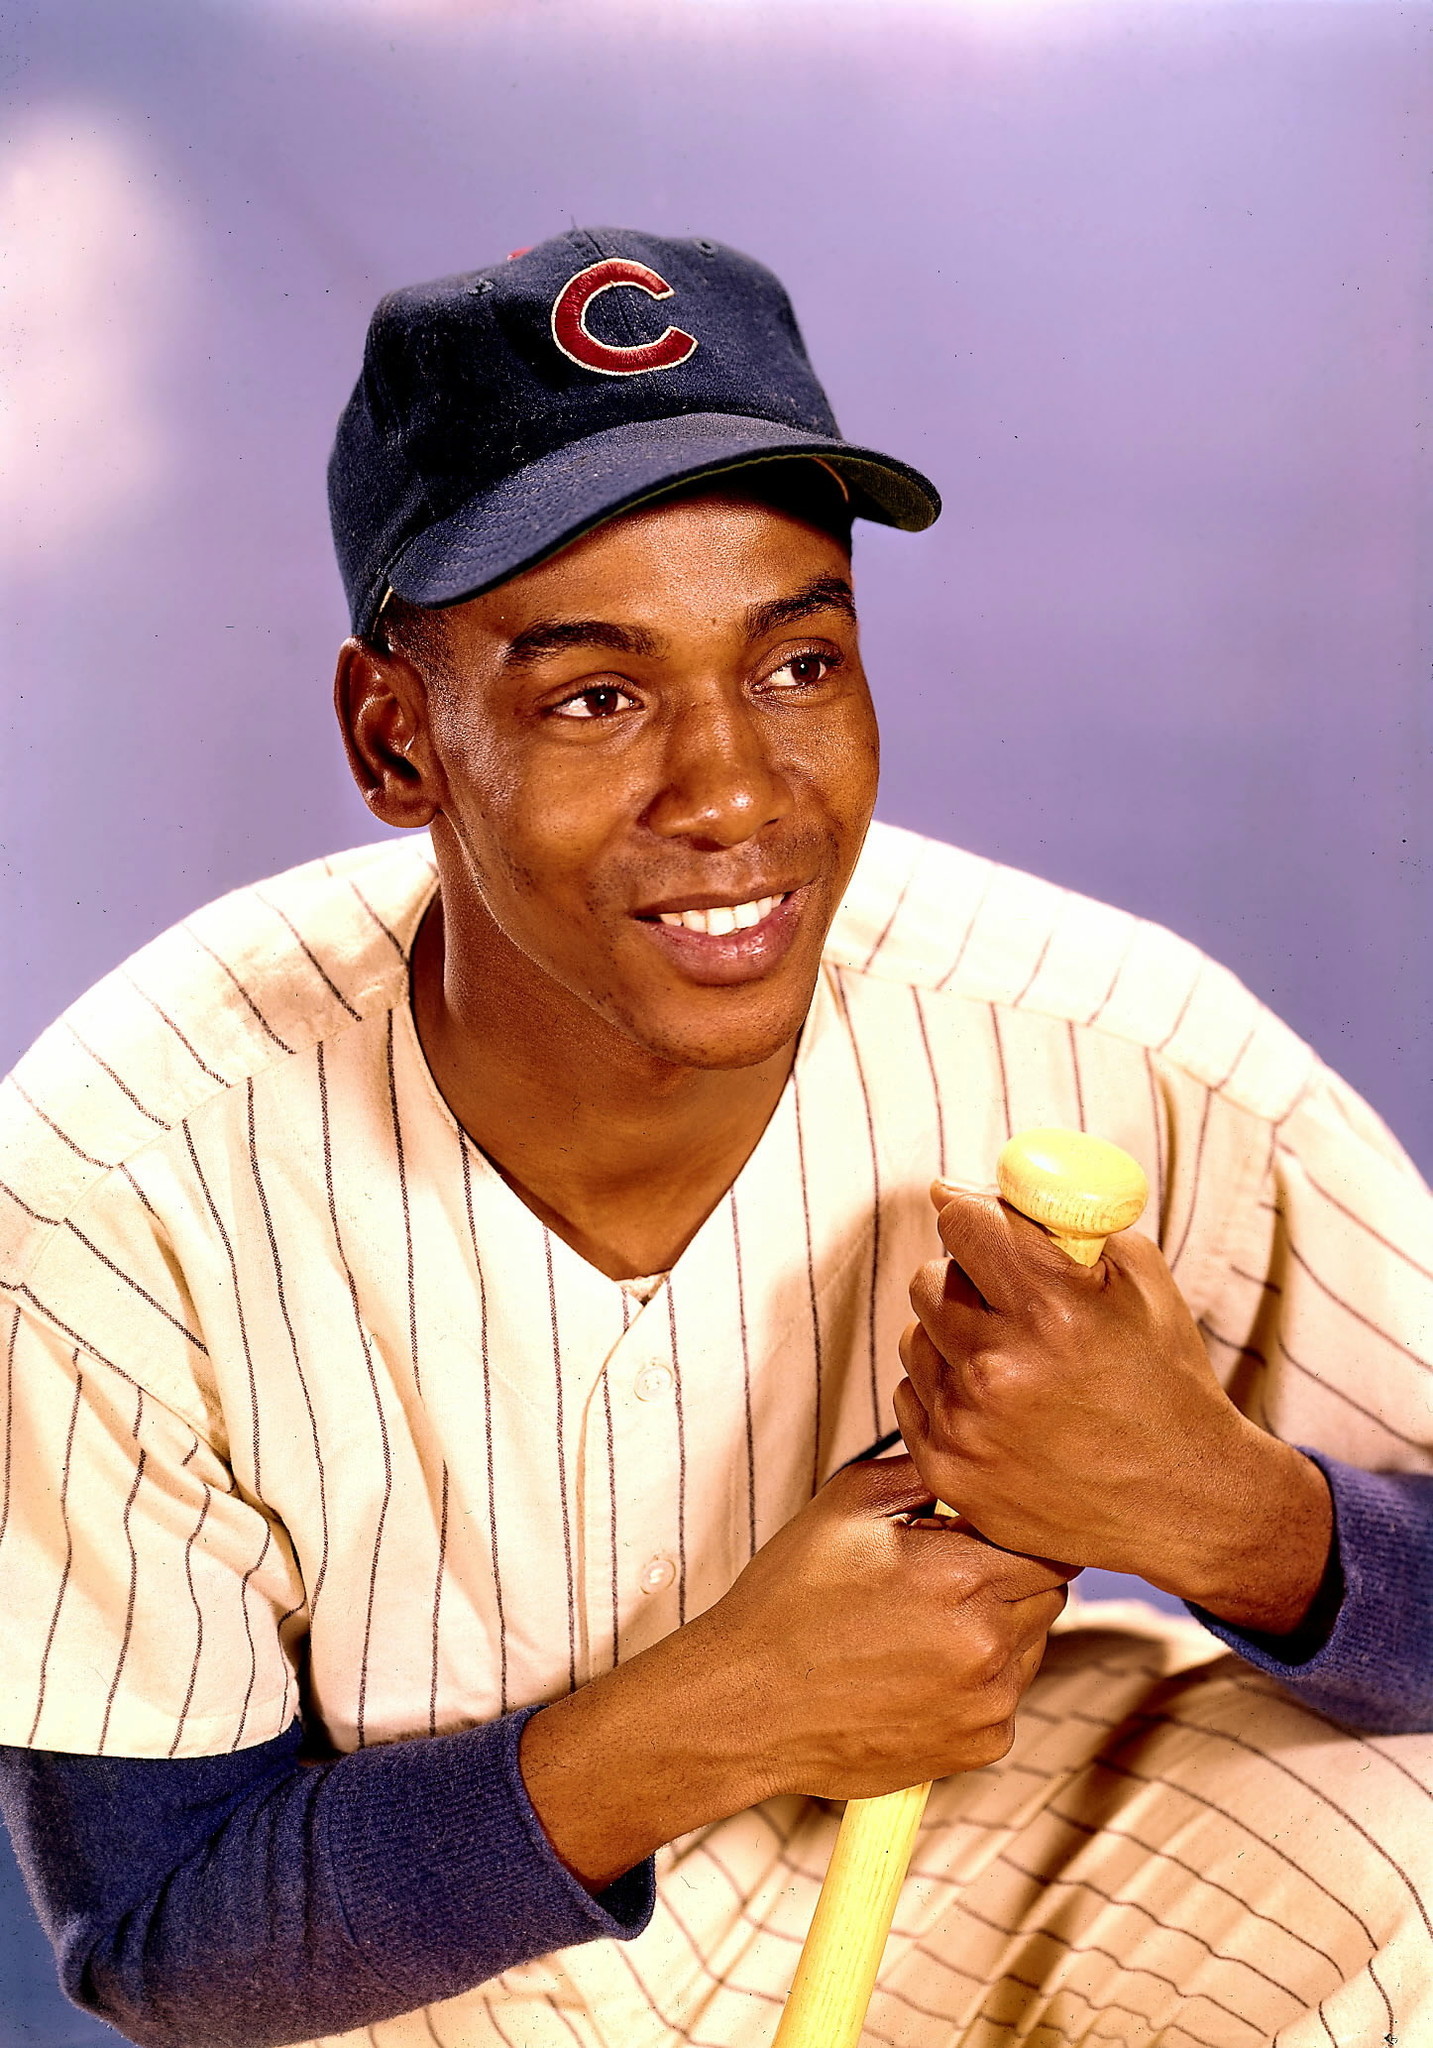 Ernie Banks hits 500th HR on May 12, 1970